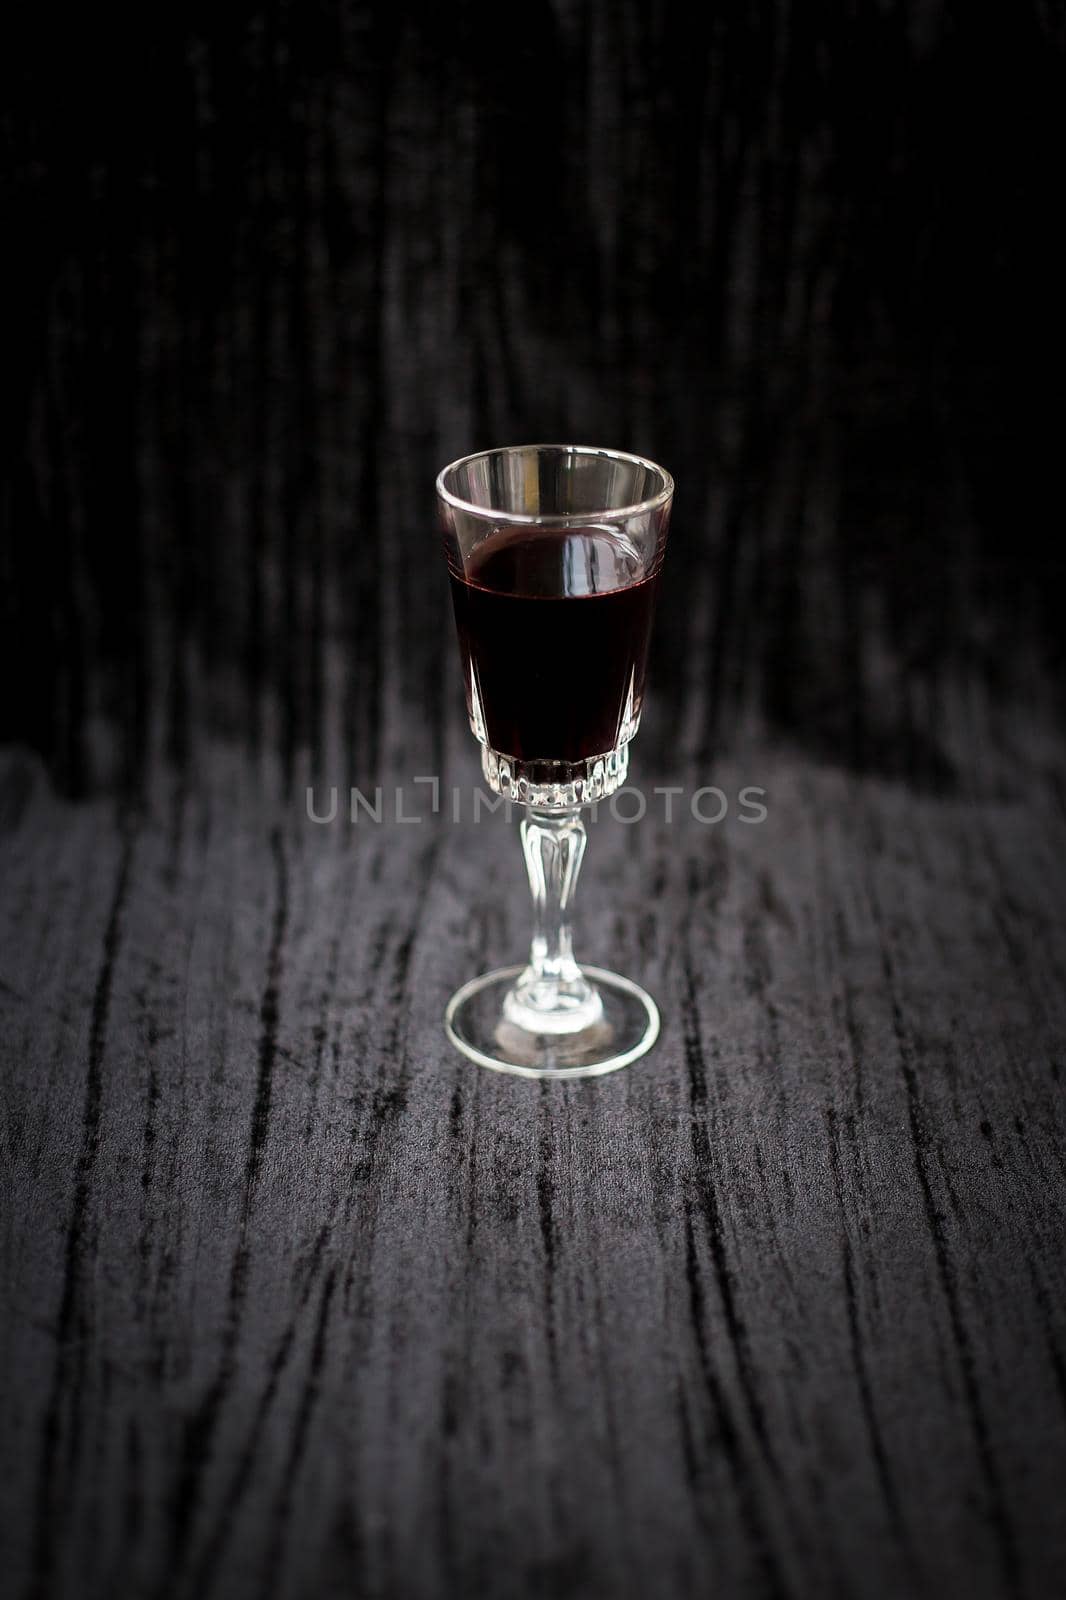 glass of red wine on a black velvet background, close-up.